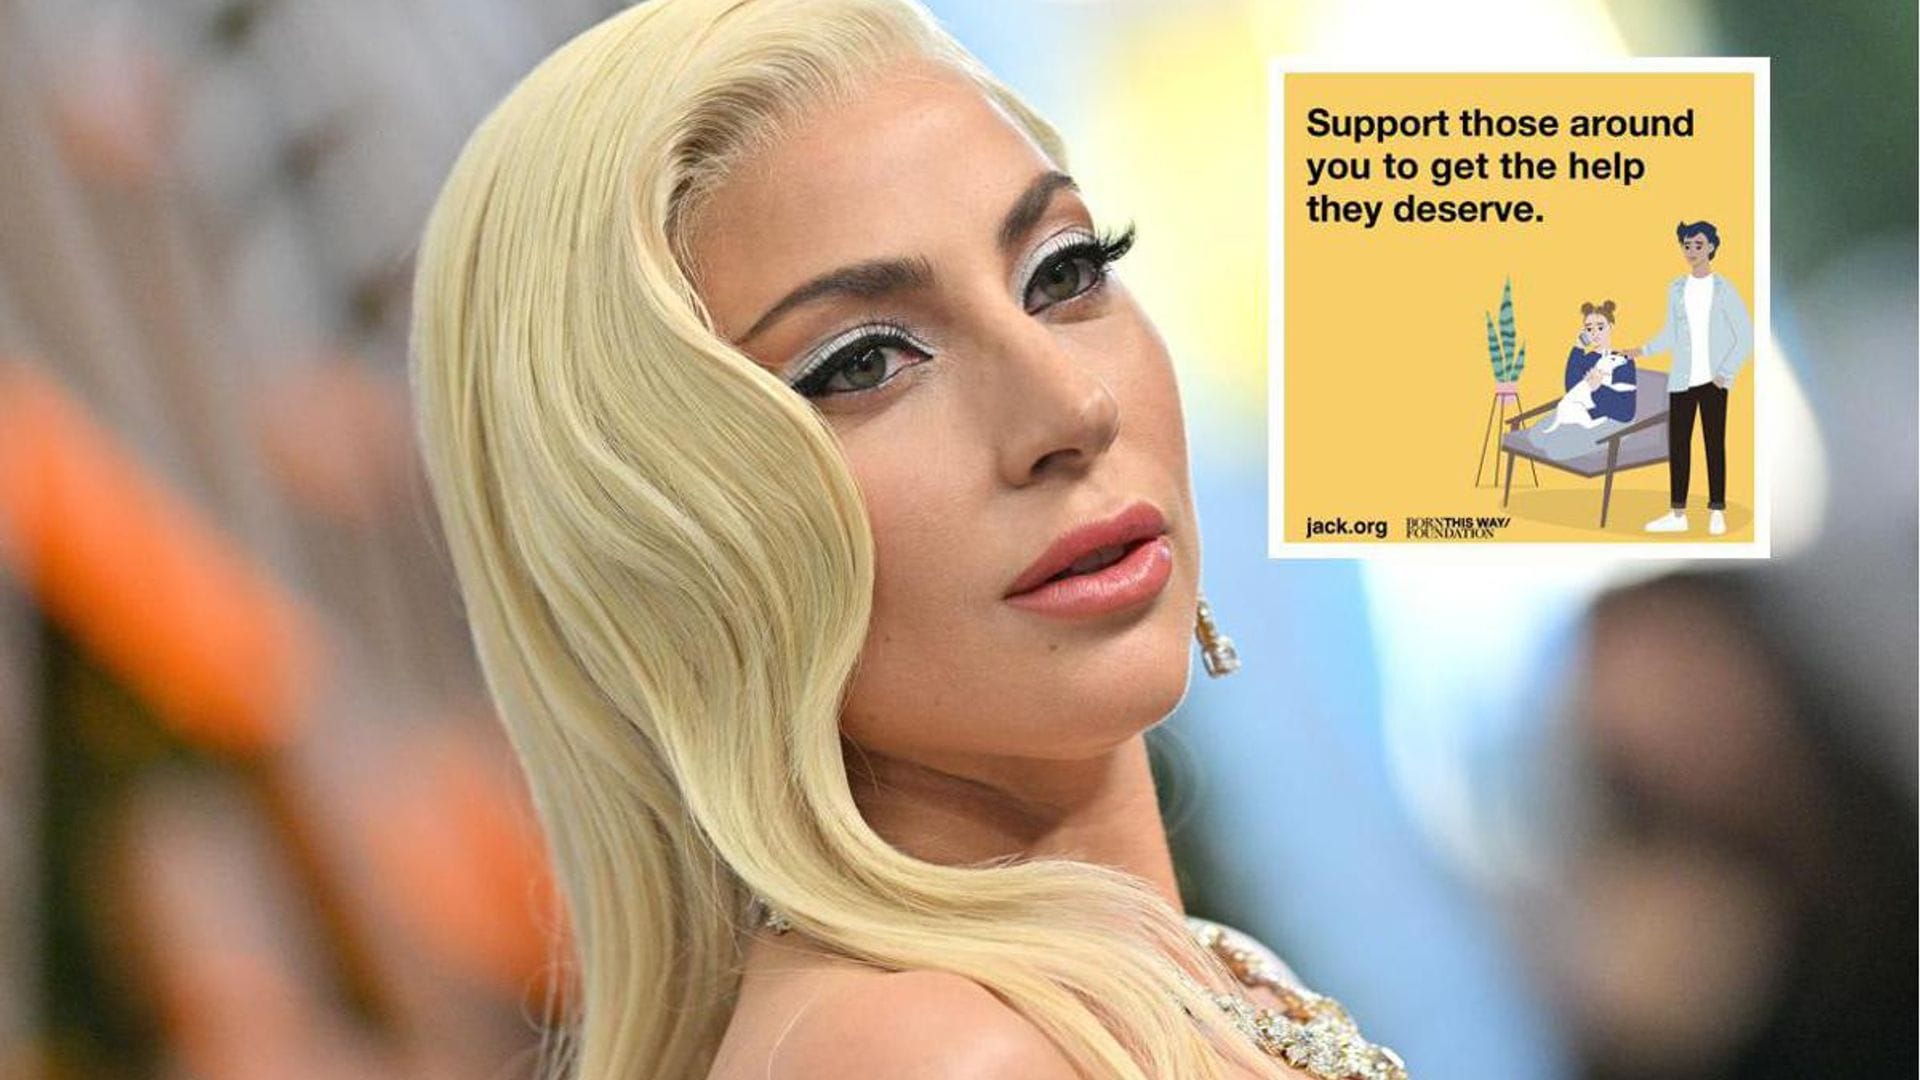 Lady Gaga shares ‘five golden rules’ to safely be there for someone struggling with mental health